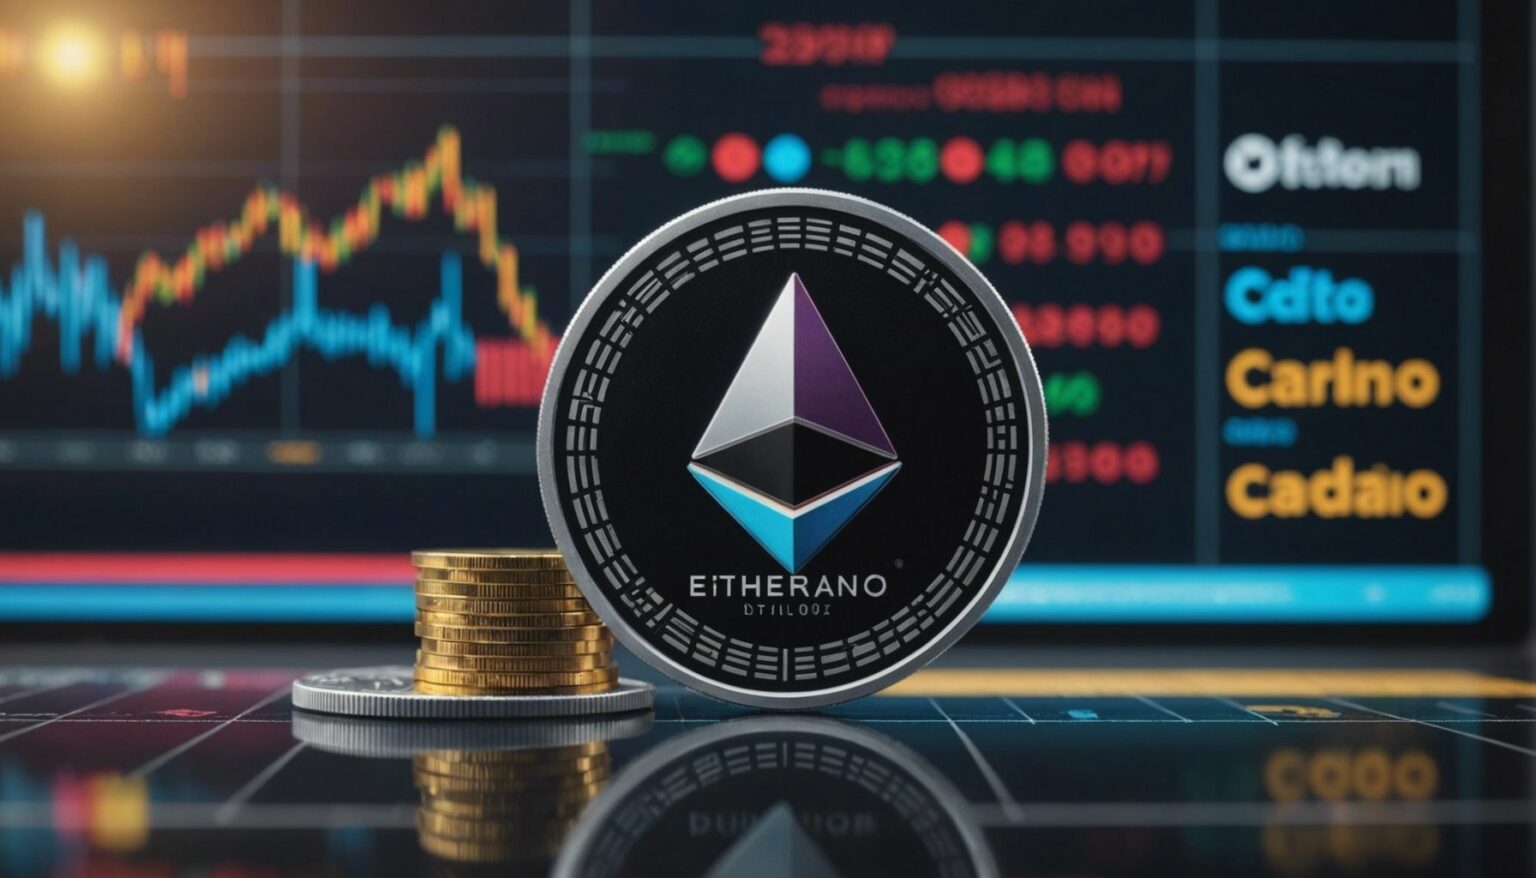 A colorful thumbnail showing Ethereum, Cardano, and Solana logos against a digital financial chart background.